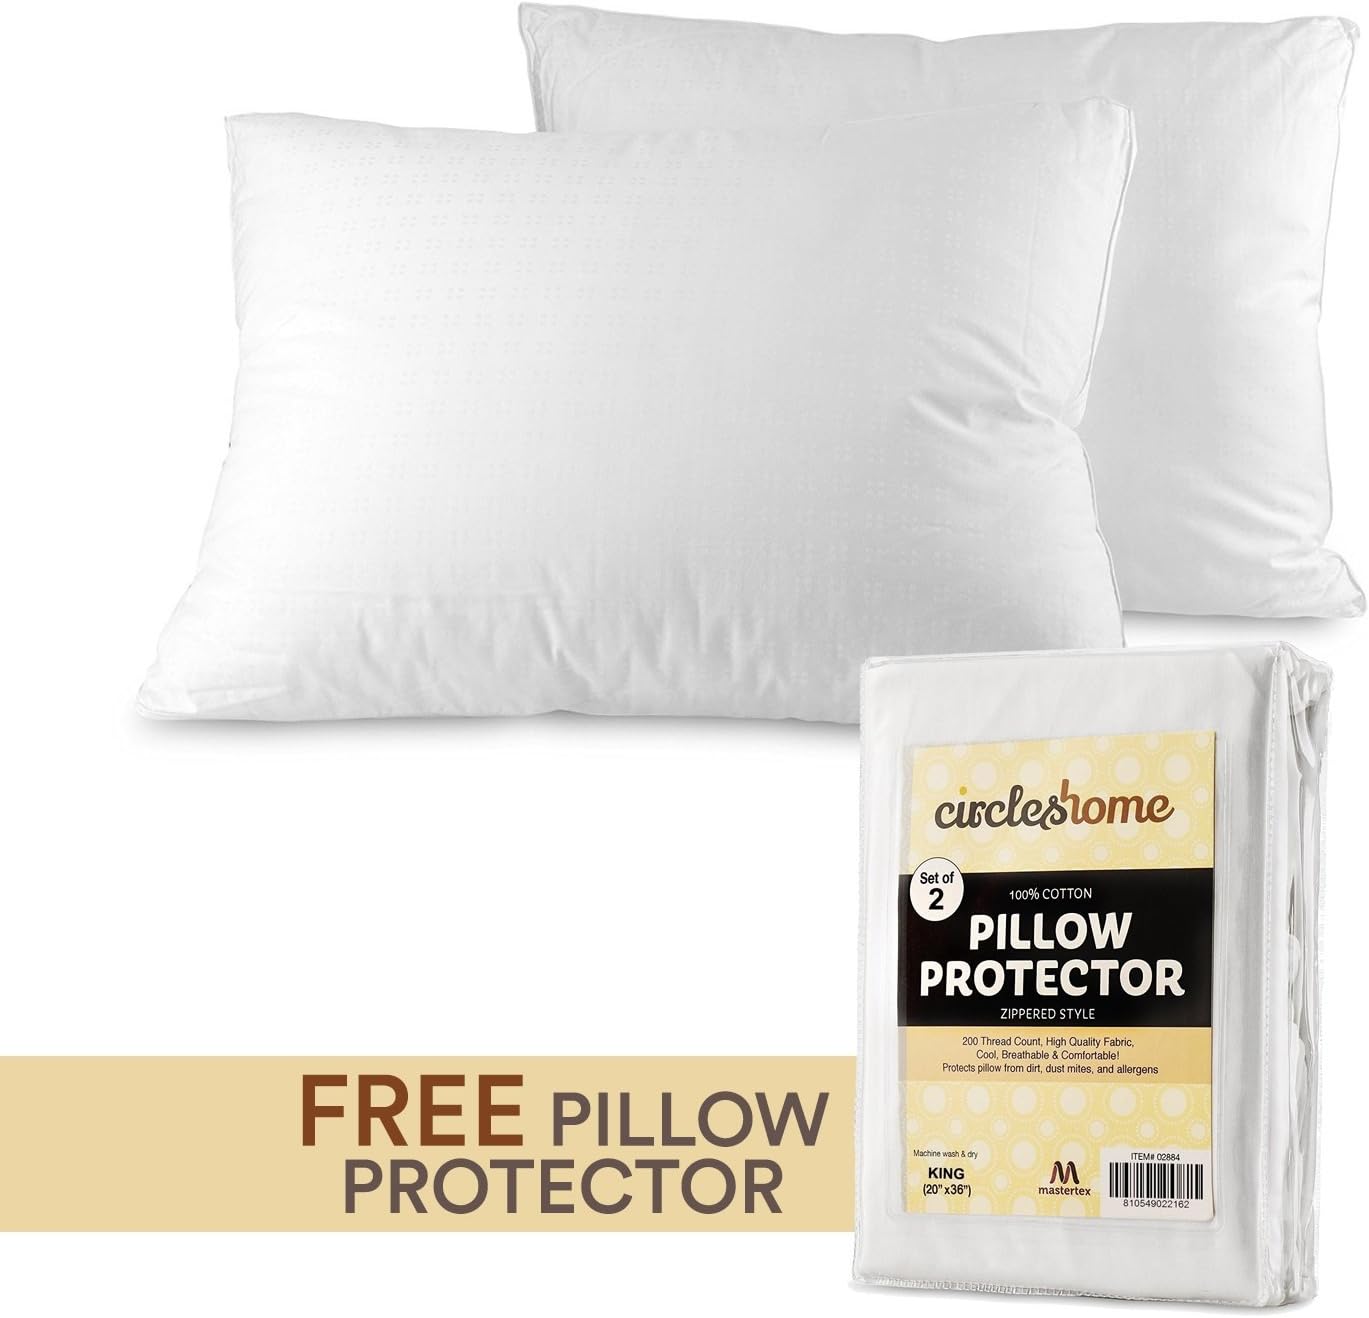 Mastertex Down Alternative  Cotton Top Bed Pillow Free Cotton Pillow Protector - 2 Pack) (King Size Pillow - Set of 2-20x36x1.5)